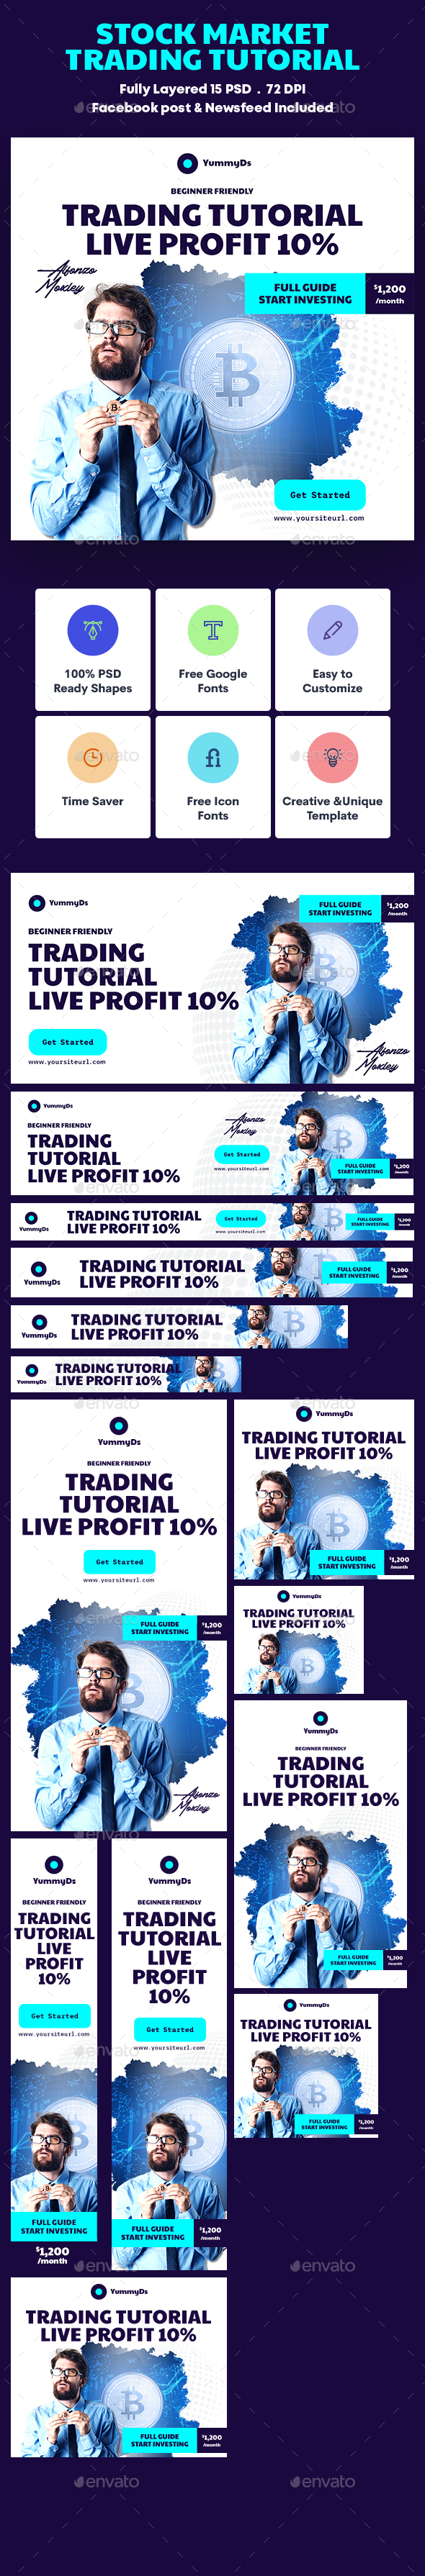 Stock Market Trading Tutorial Banners Ad